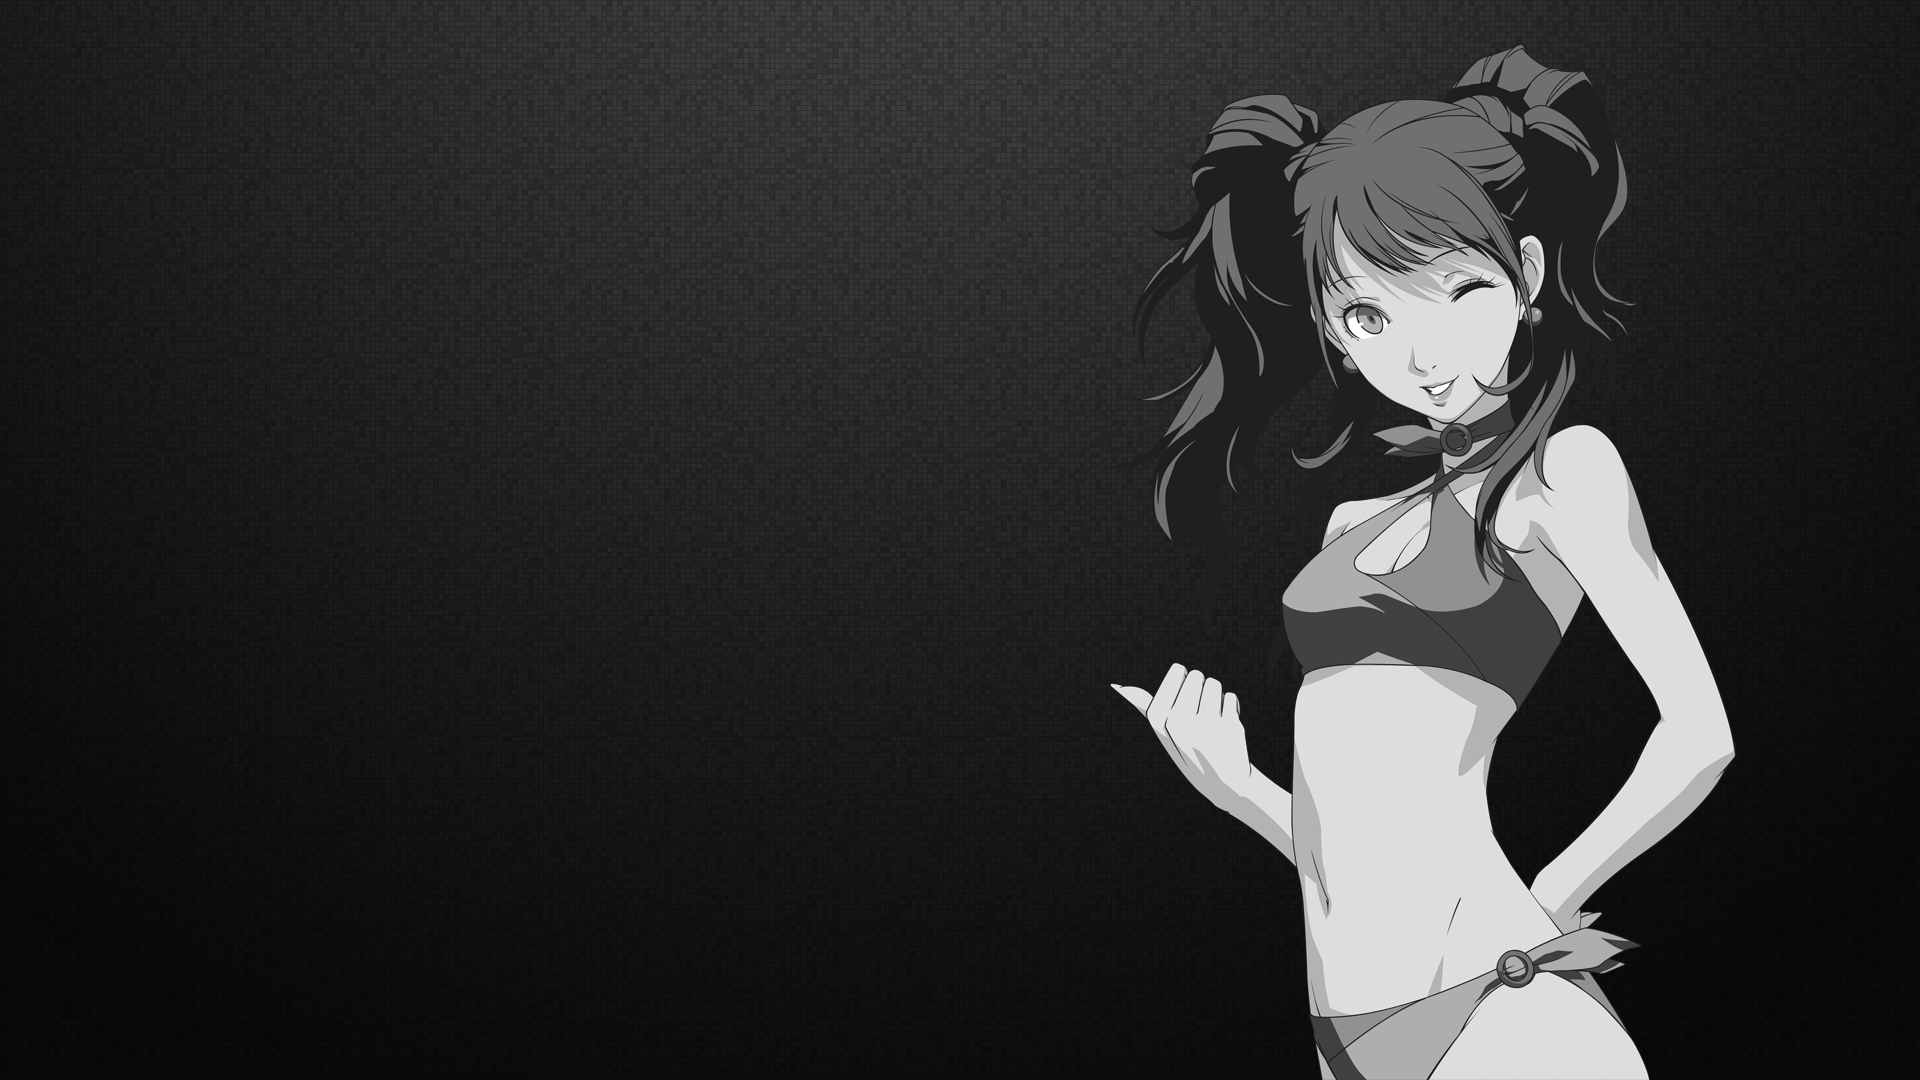 Anime 1920x1080 anime girls Persona 4 Persona series Kujikawa Rise anime video games video game art monochrome video game girls looking at viewer one eye closed belly women standing